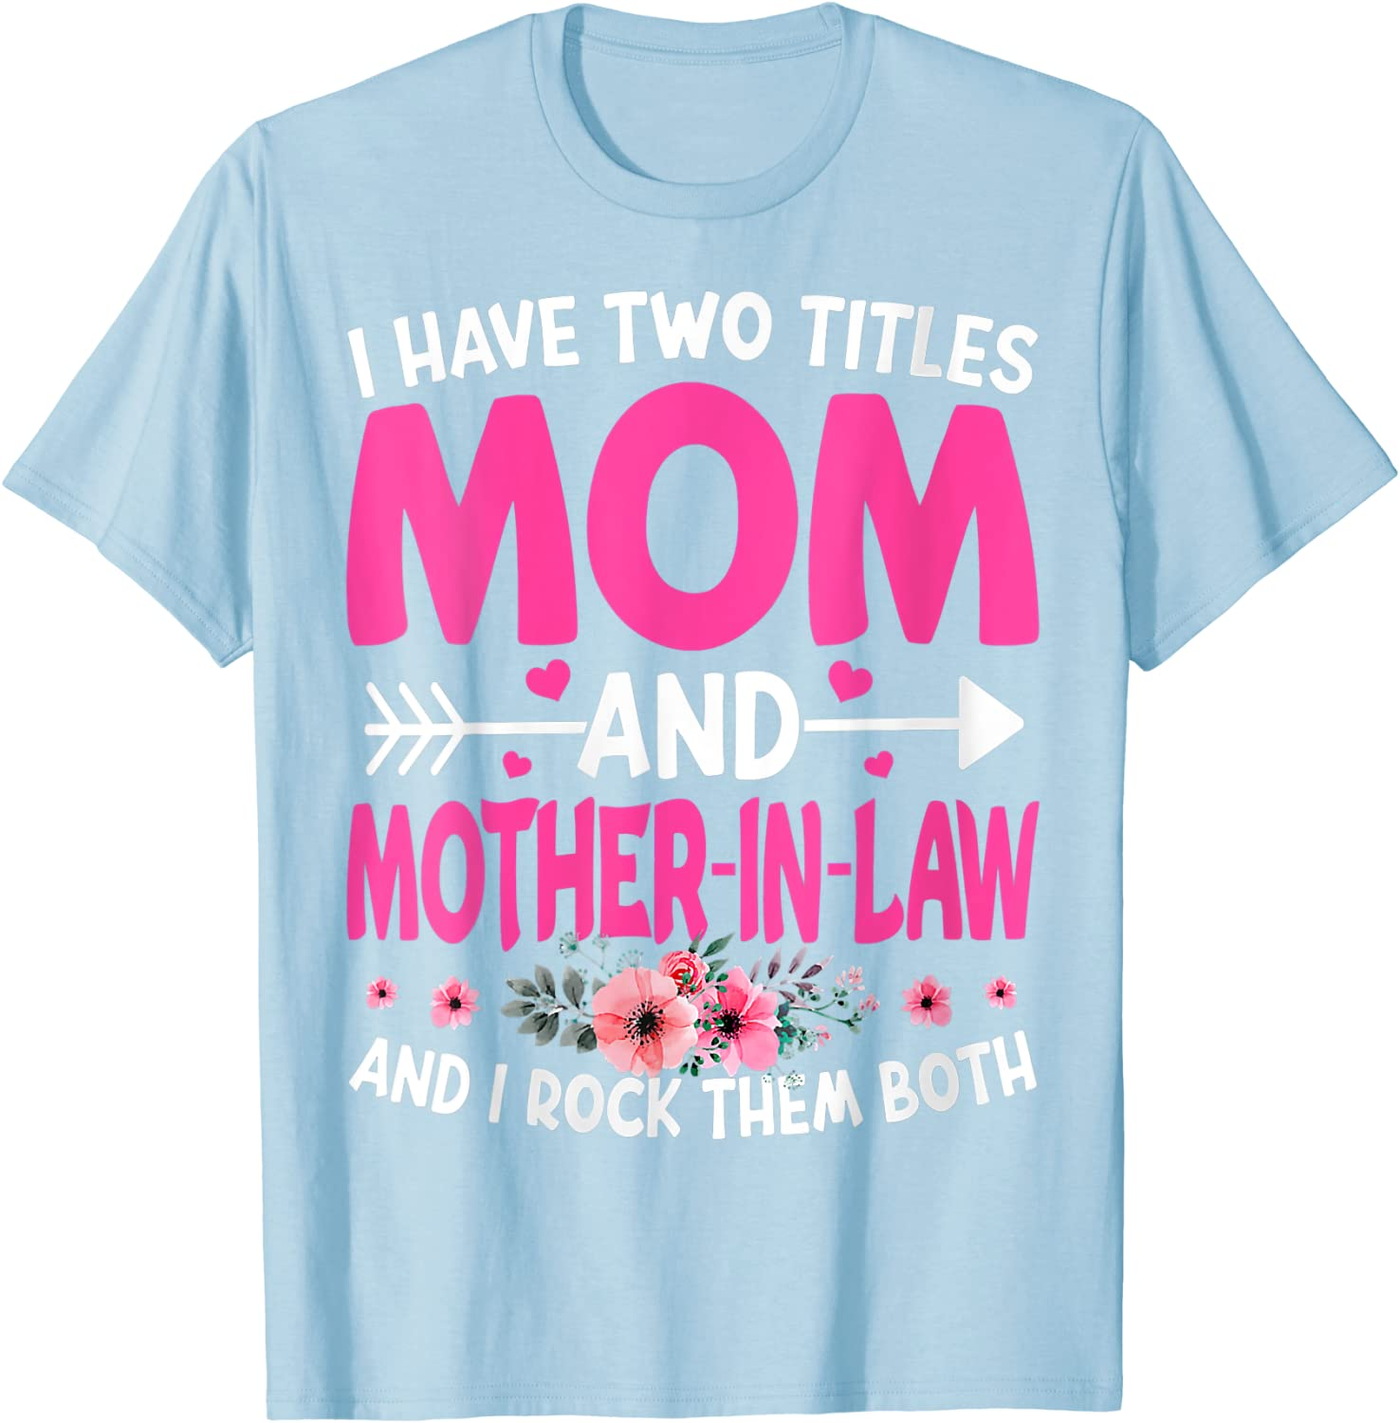 Funny Two Titles Mom And Mother In Law T-Shirt